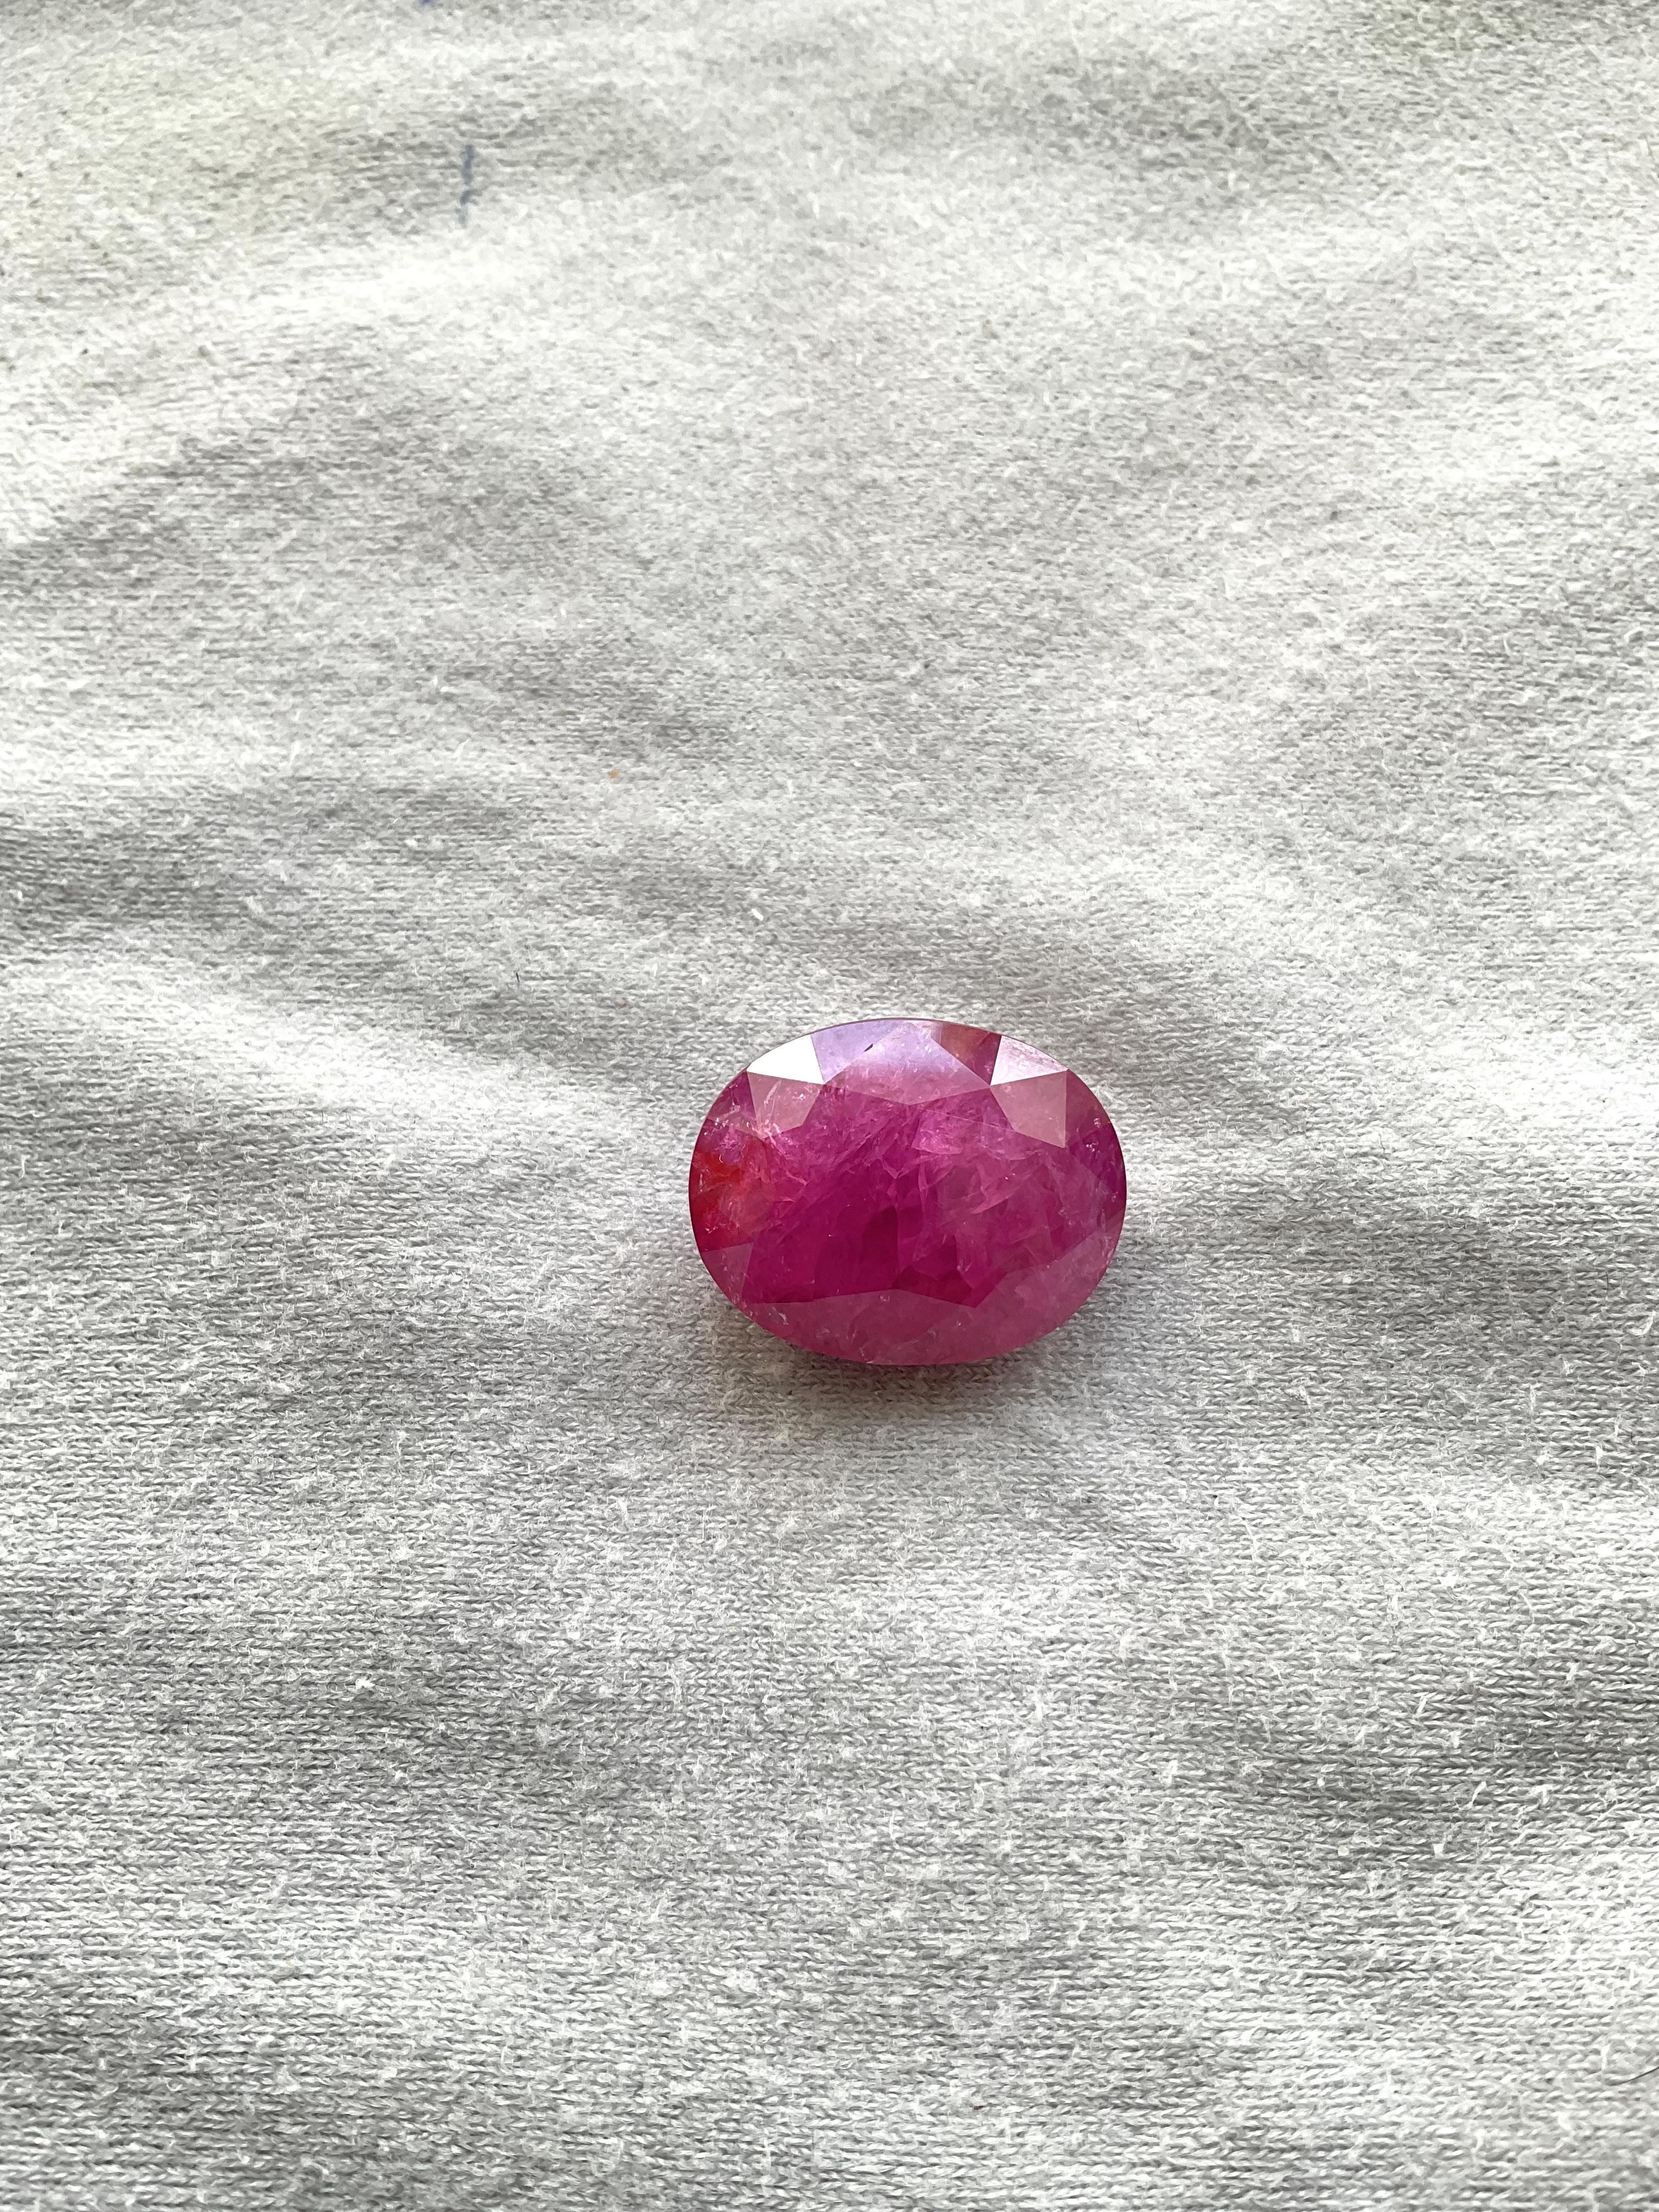 RARE 34 CARATS RUBY !!
As we are auction partners at Gemfields, we have sourced these rubies from winning auctions and had cut them in our in house manufacturing responsibly.

Weight: 34.29 Carats
Size: 21x17x10 MM
Pieces: 1
Shape: Faceted oval Cut